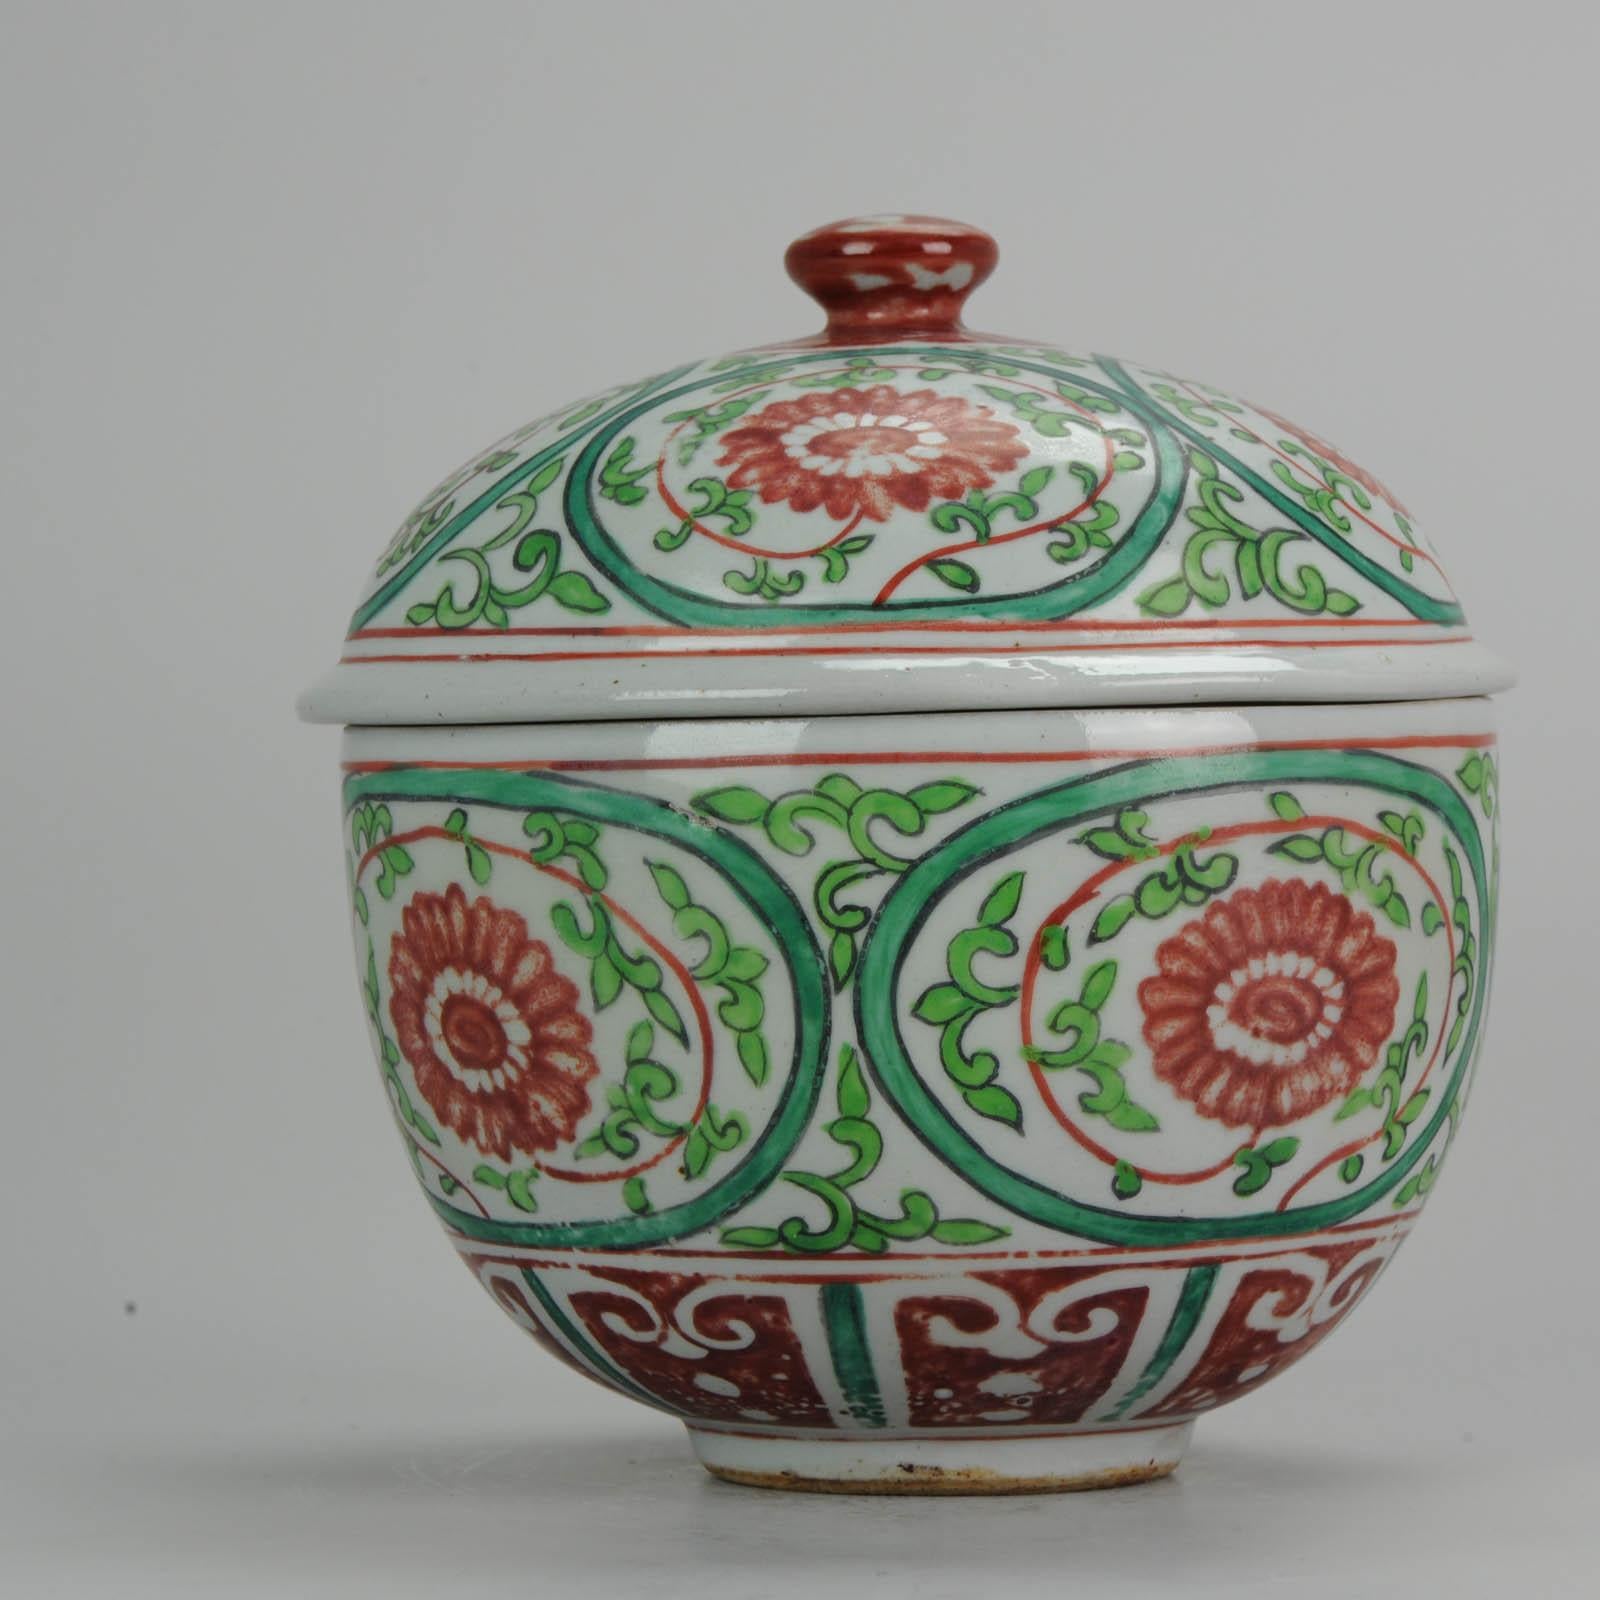 19th Century Antique Chinese Porcelain Jar 18th Century SE Asian Thai Market Bencharong Peony For Sale